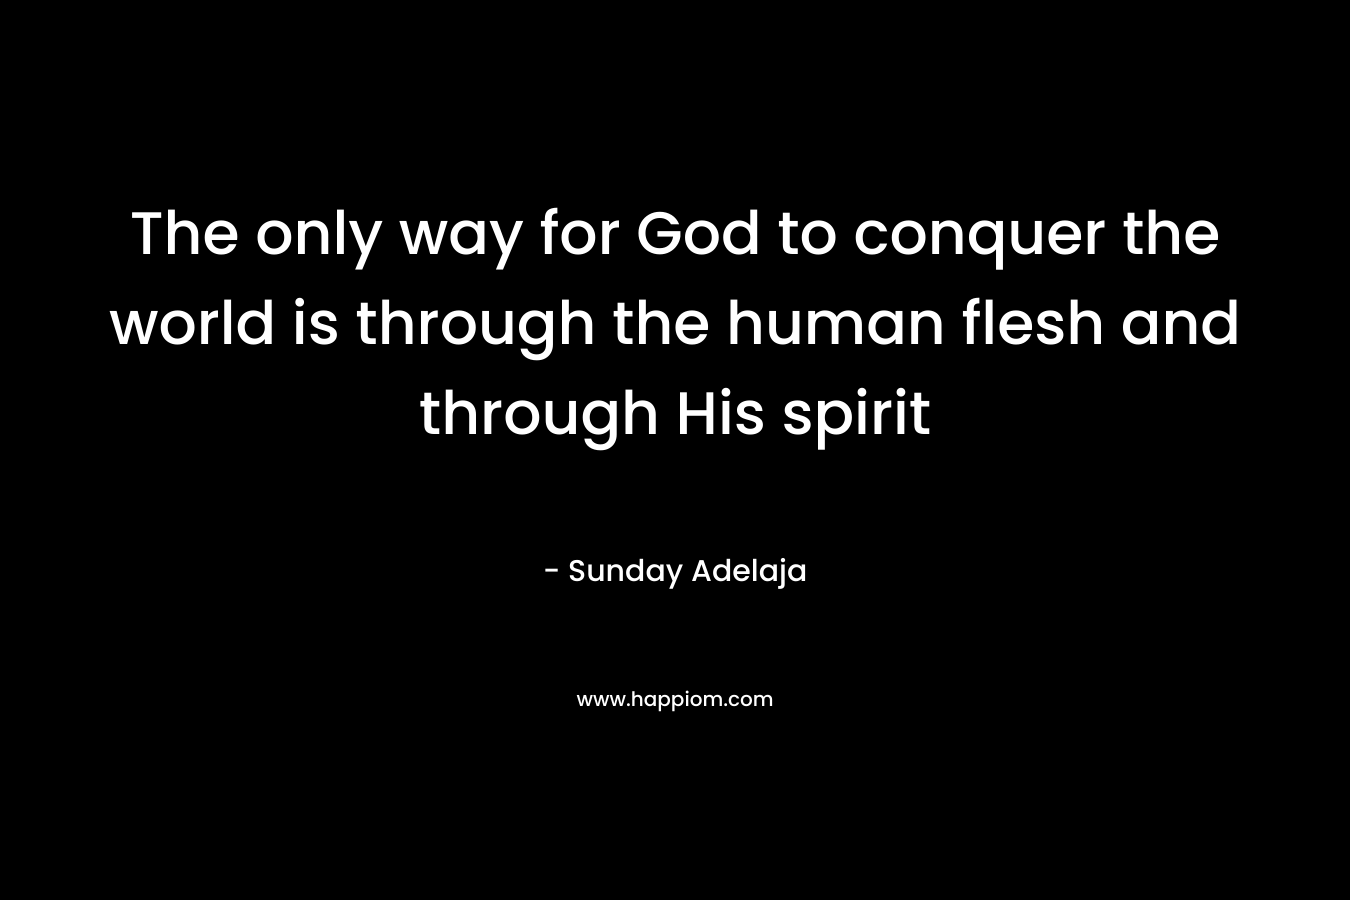 The only way for God to conquer the world is through the human flesh and through His spirit